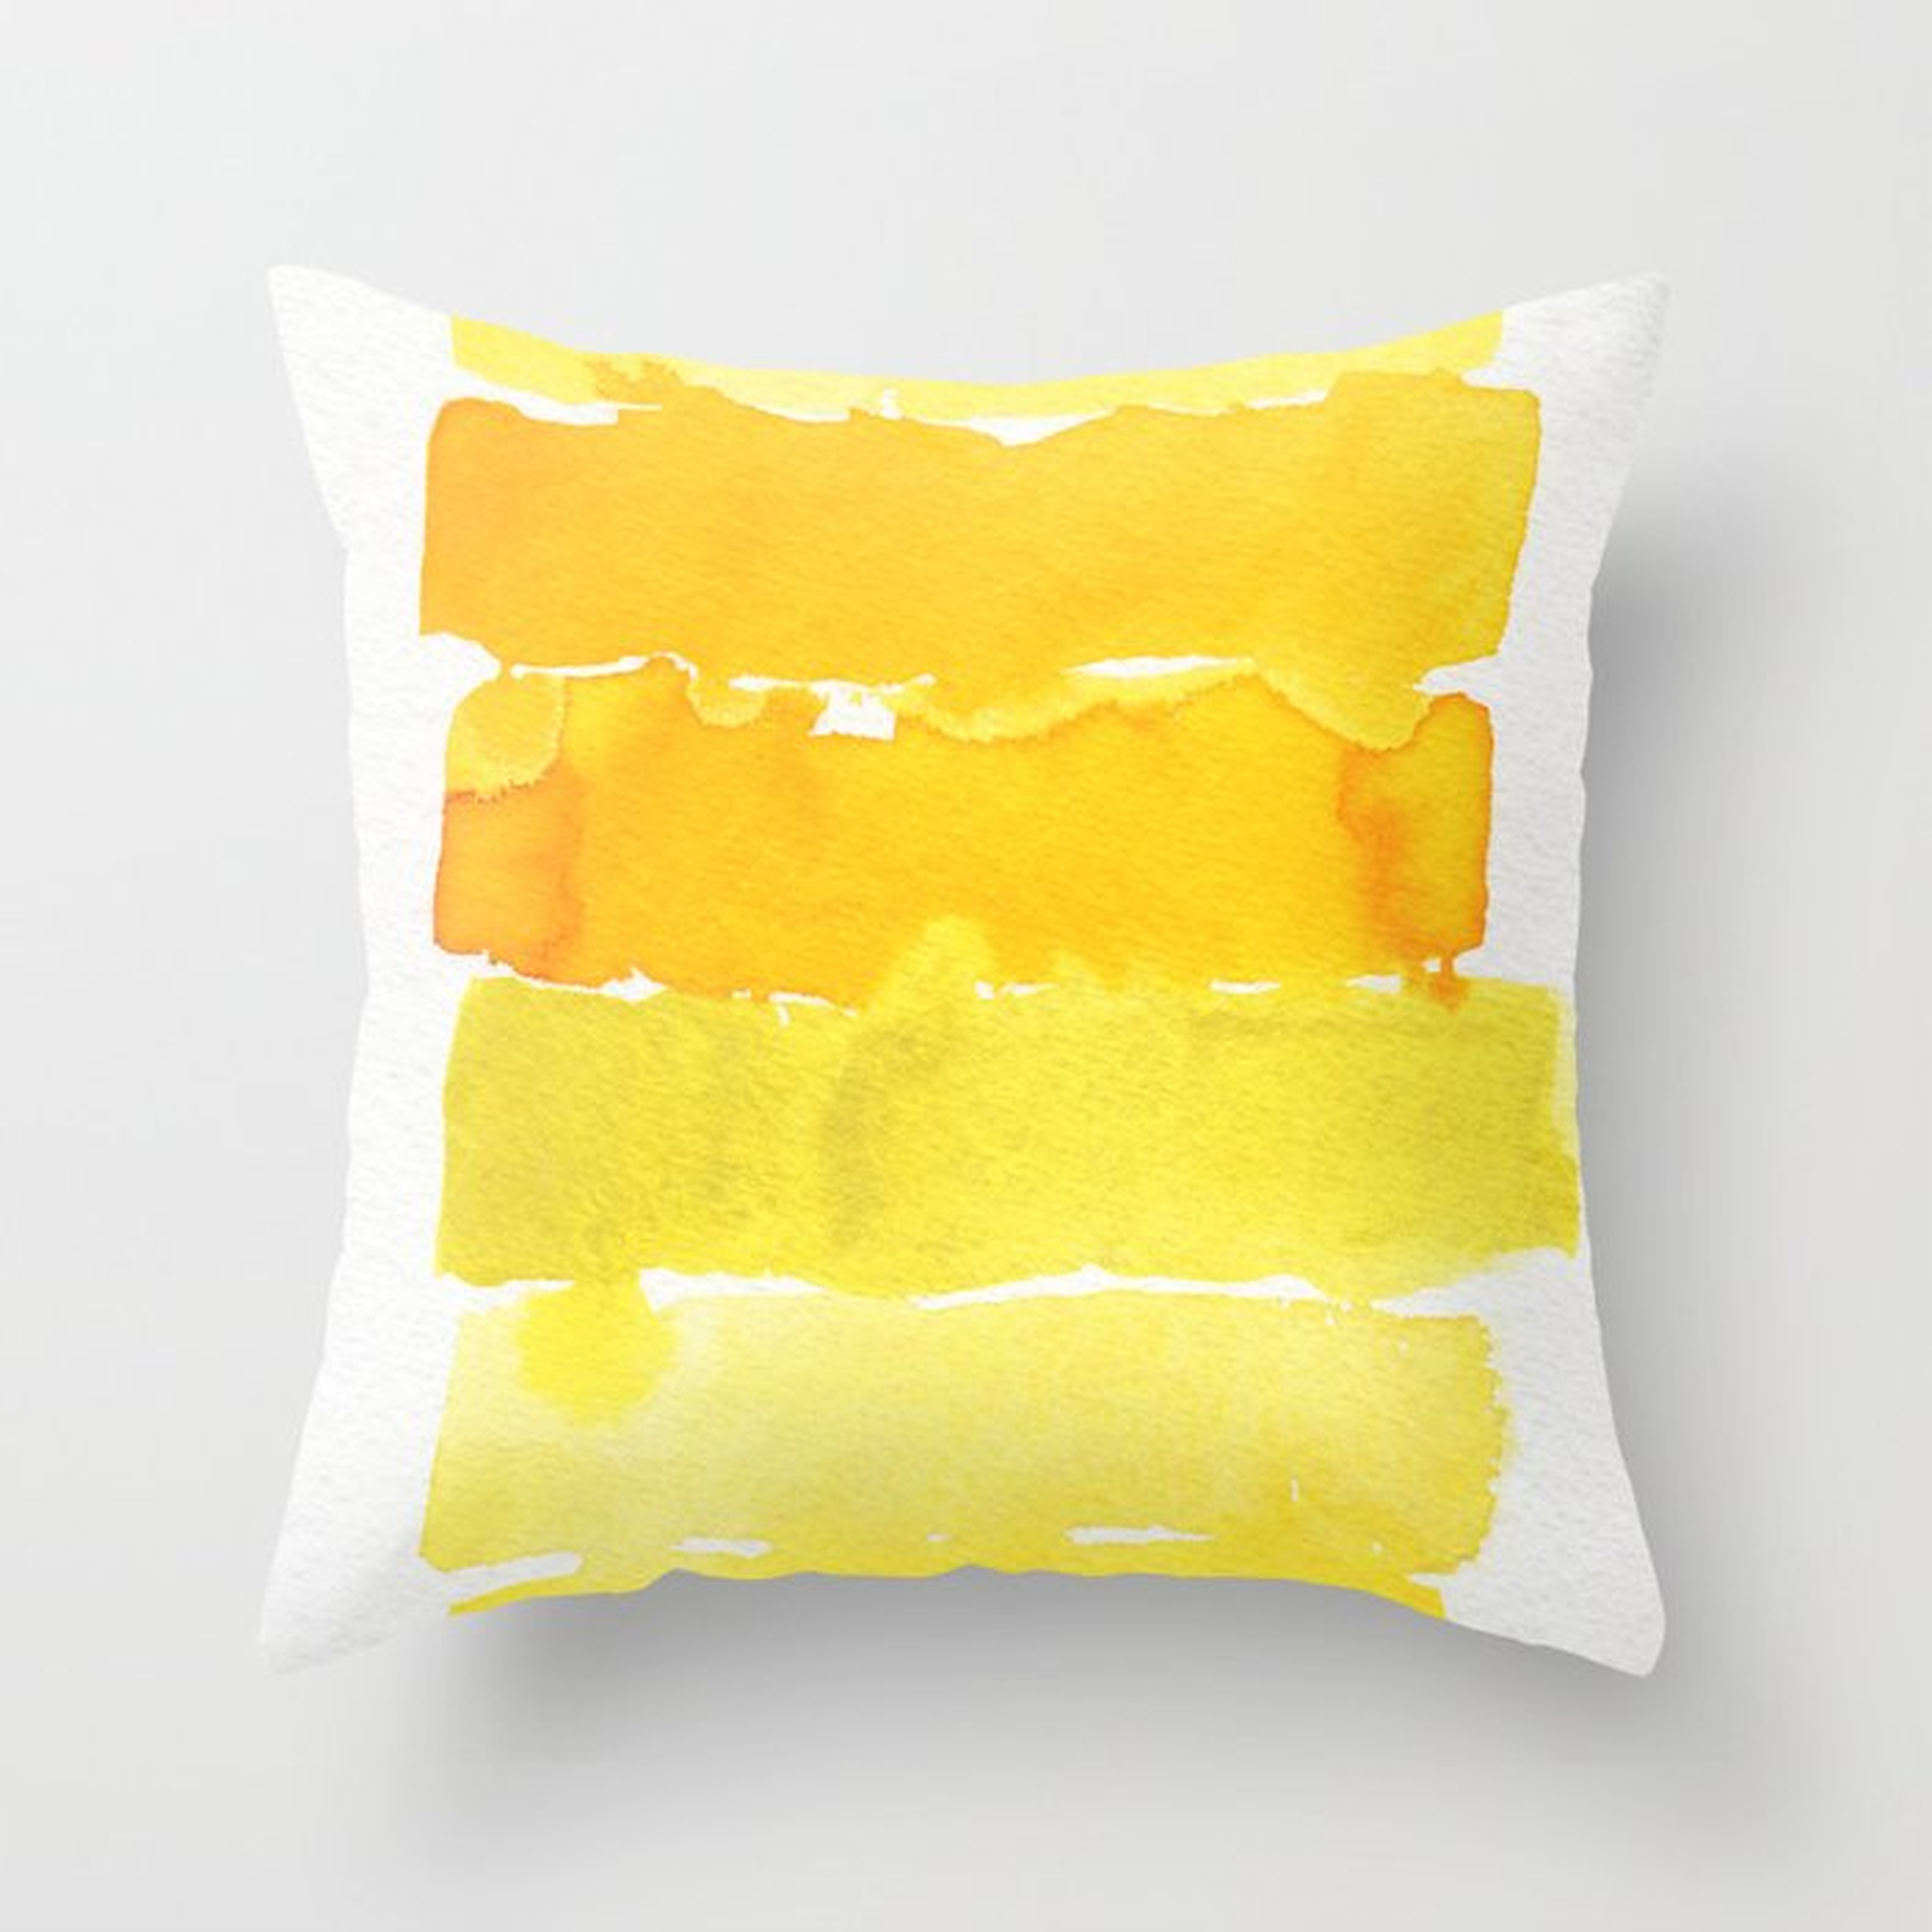 Watercolor Unlock: Yellow Throw Pillow by Georgiana Paraschiv - Cover (18" x 18") With Pillow Insert - Indoor Pillow - Society6